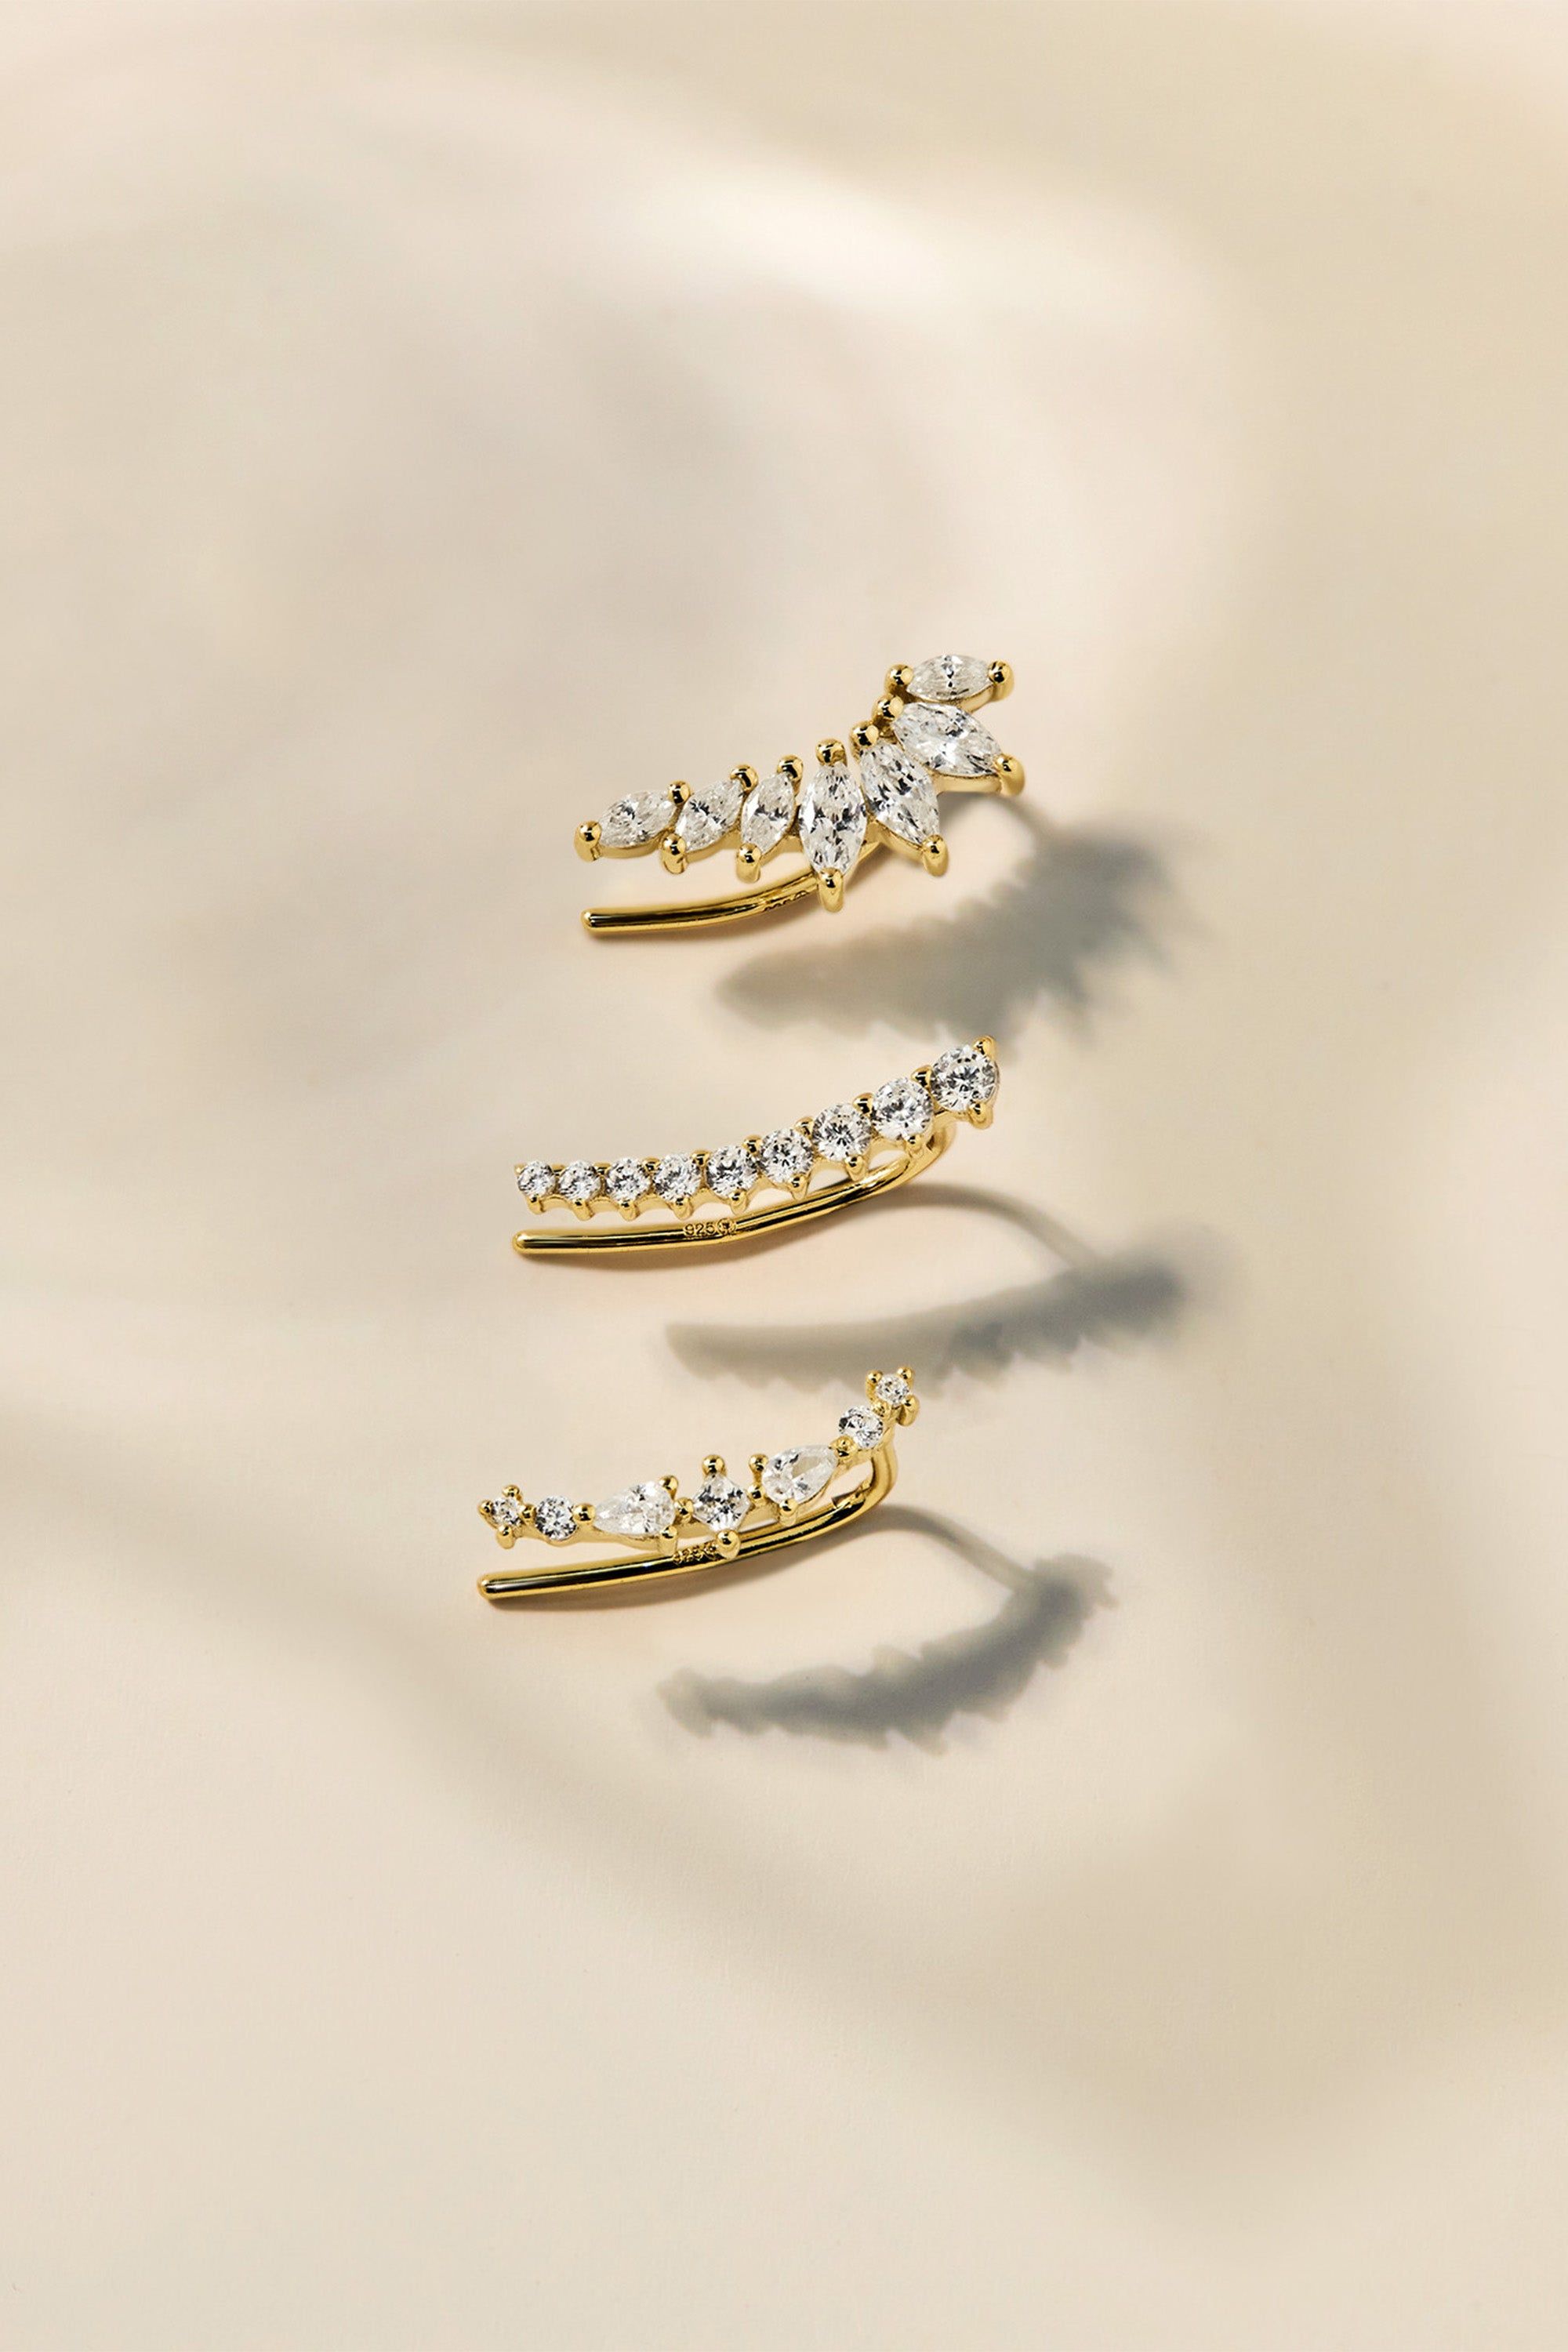 three gold - plated ear clips with clear stones